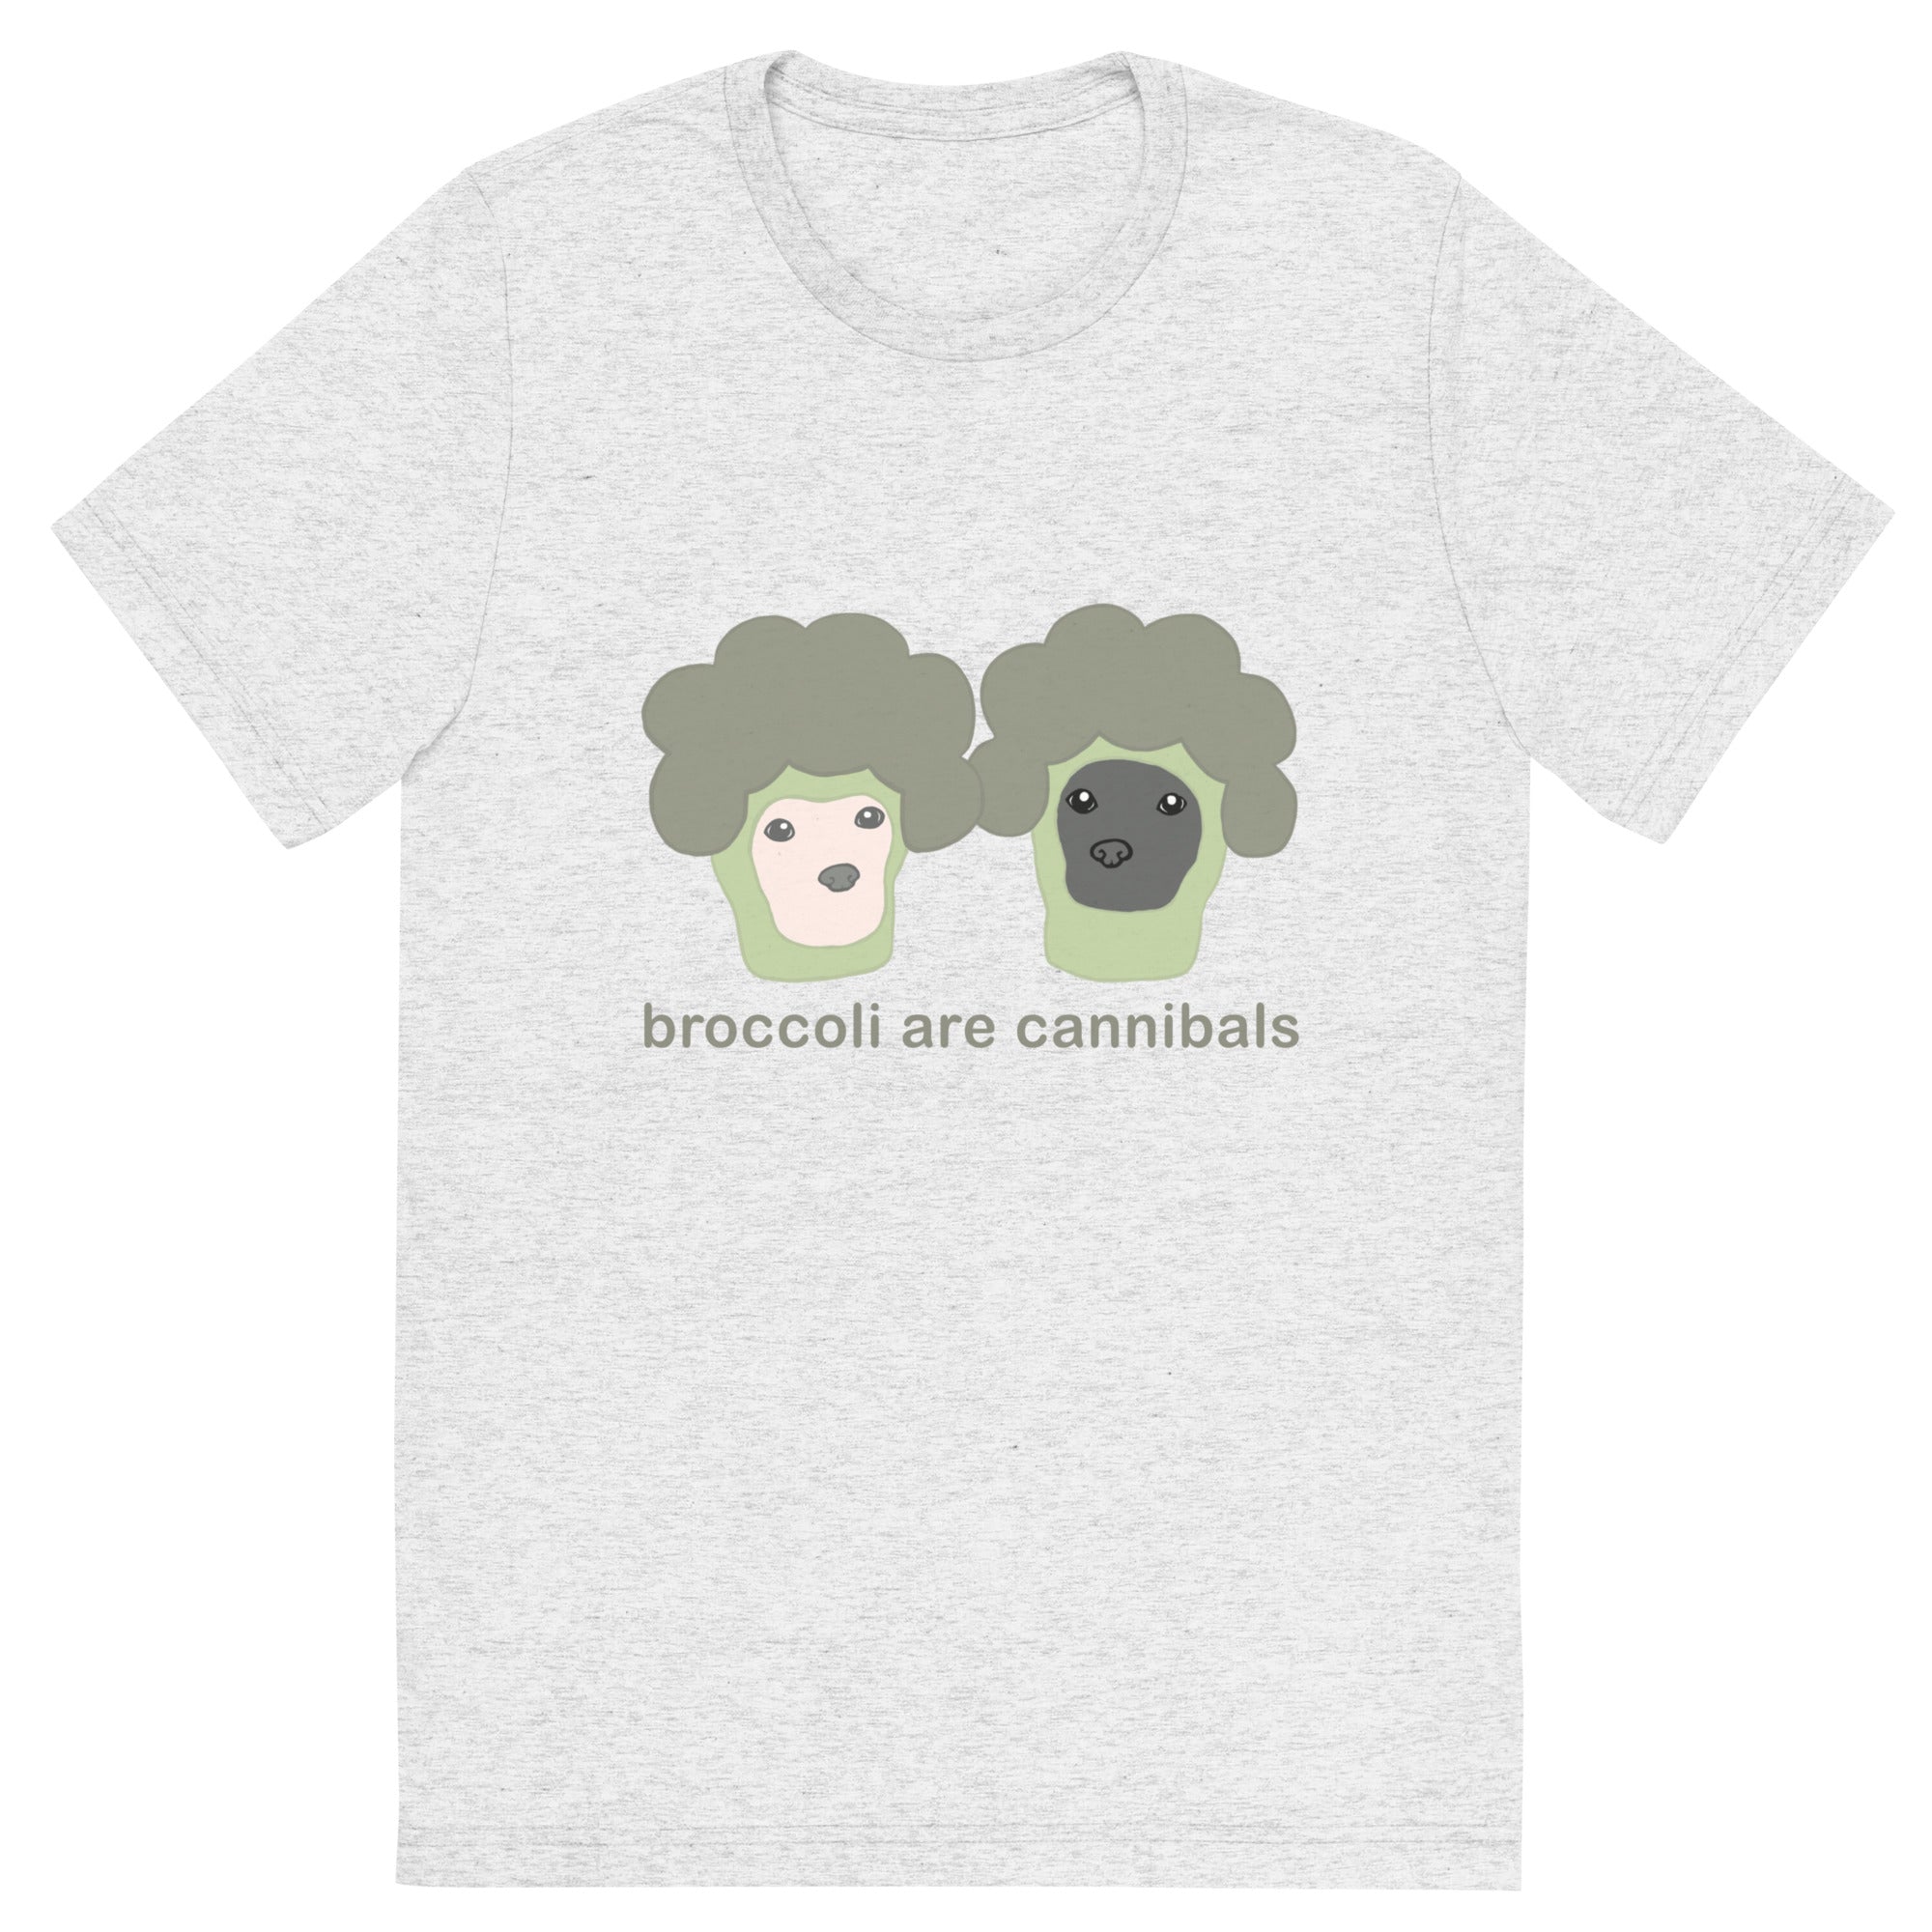 "Broccoli Are Cannibals" Adult Unisex Short sleeve t-shirt